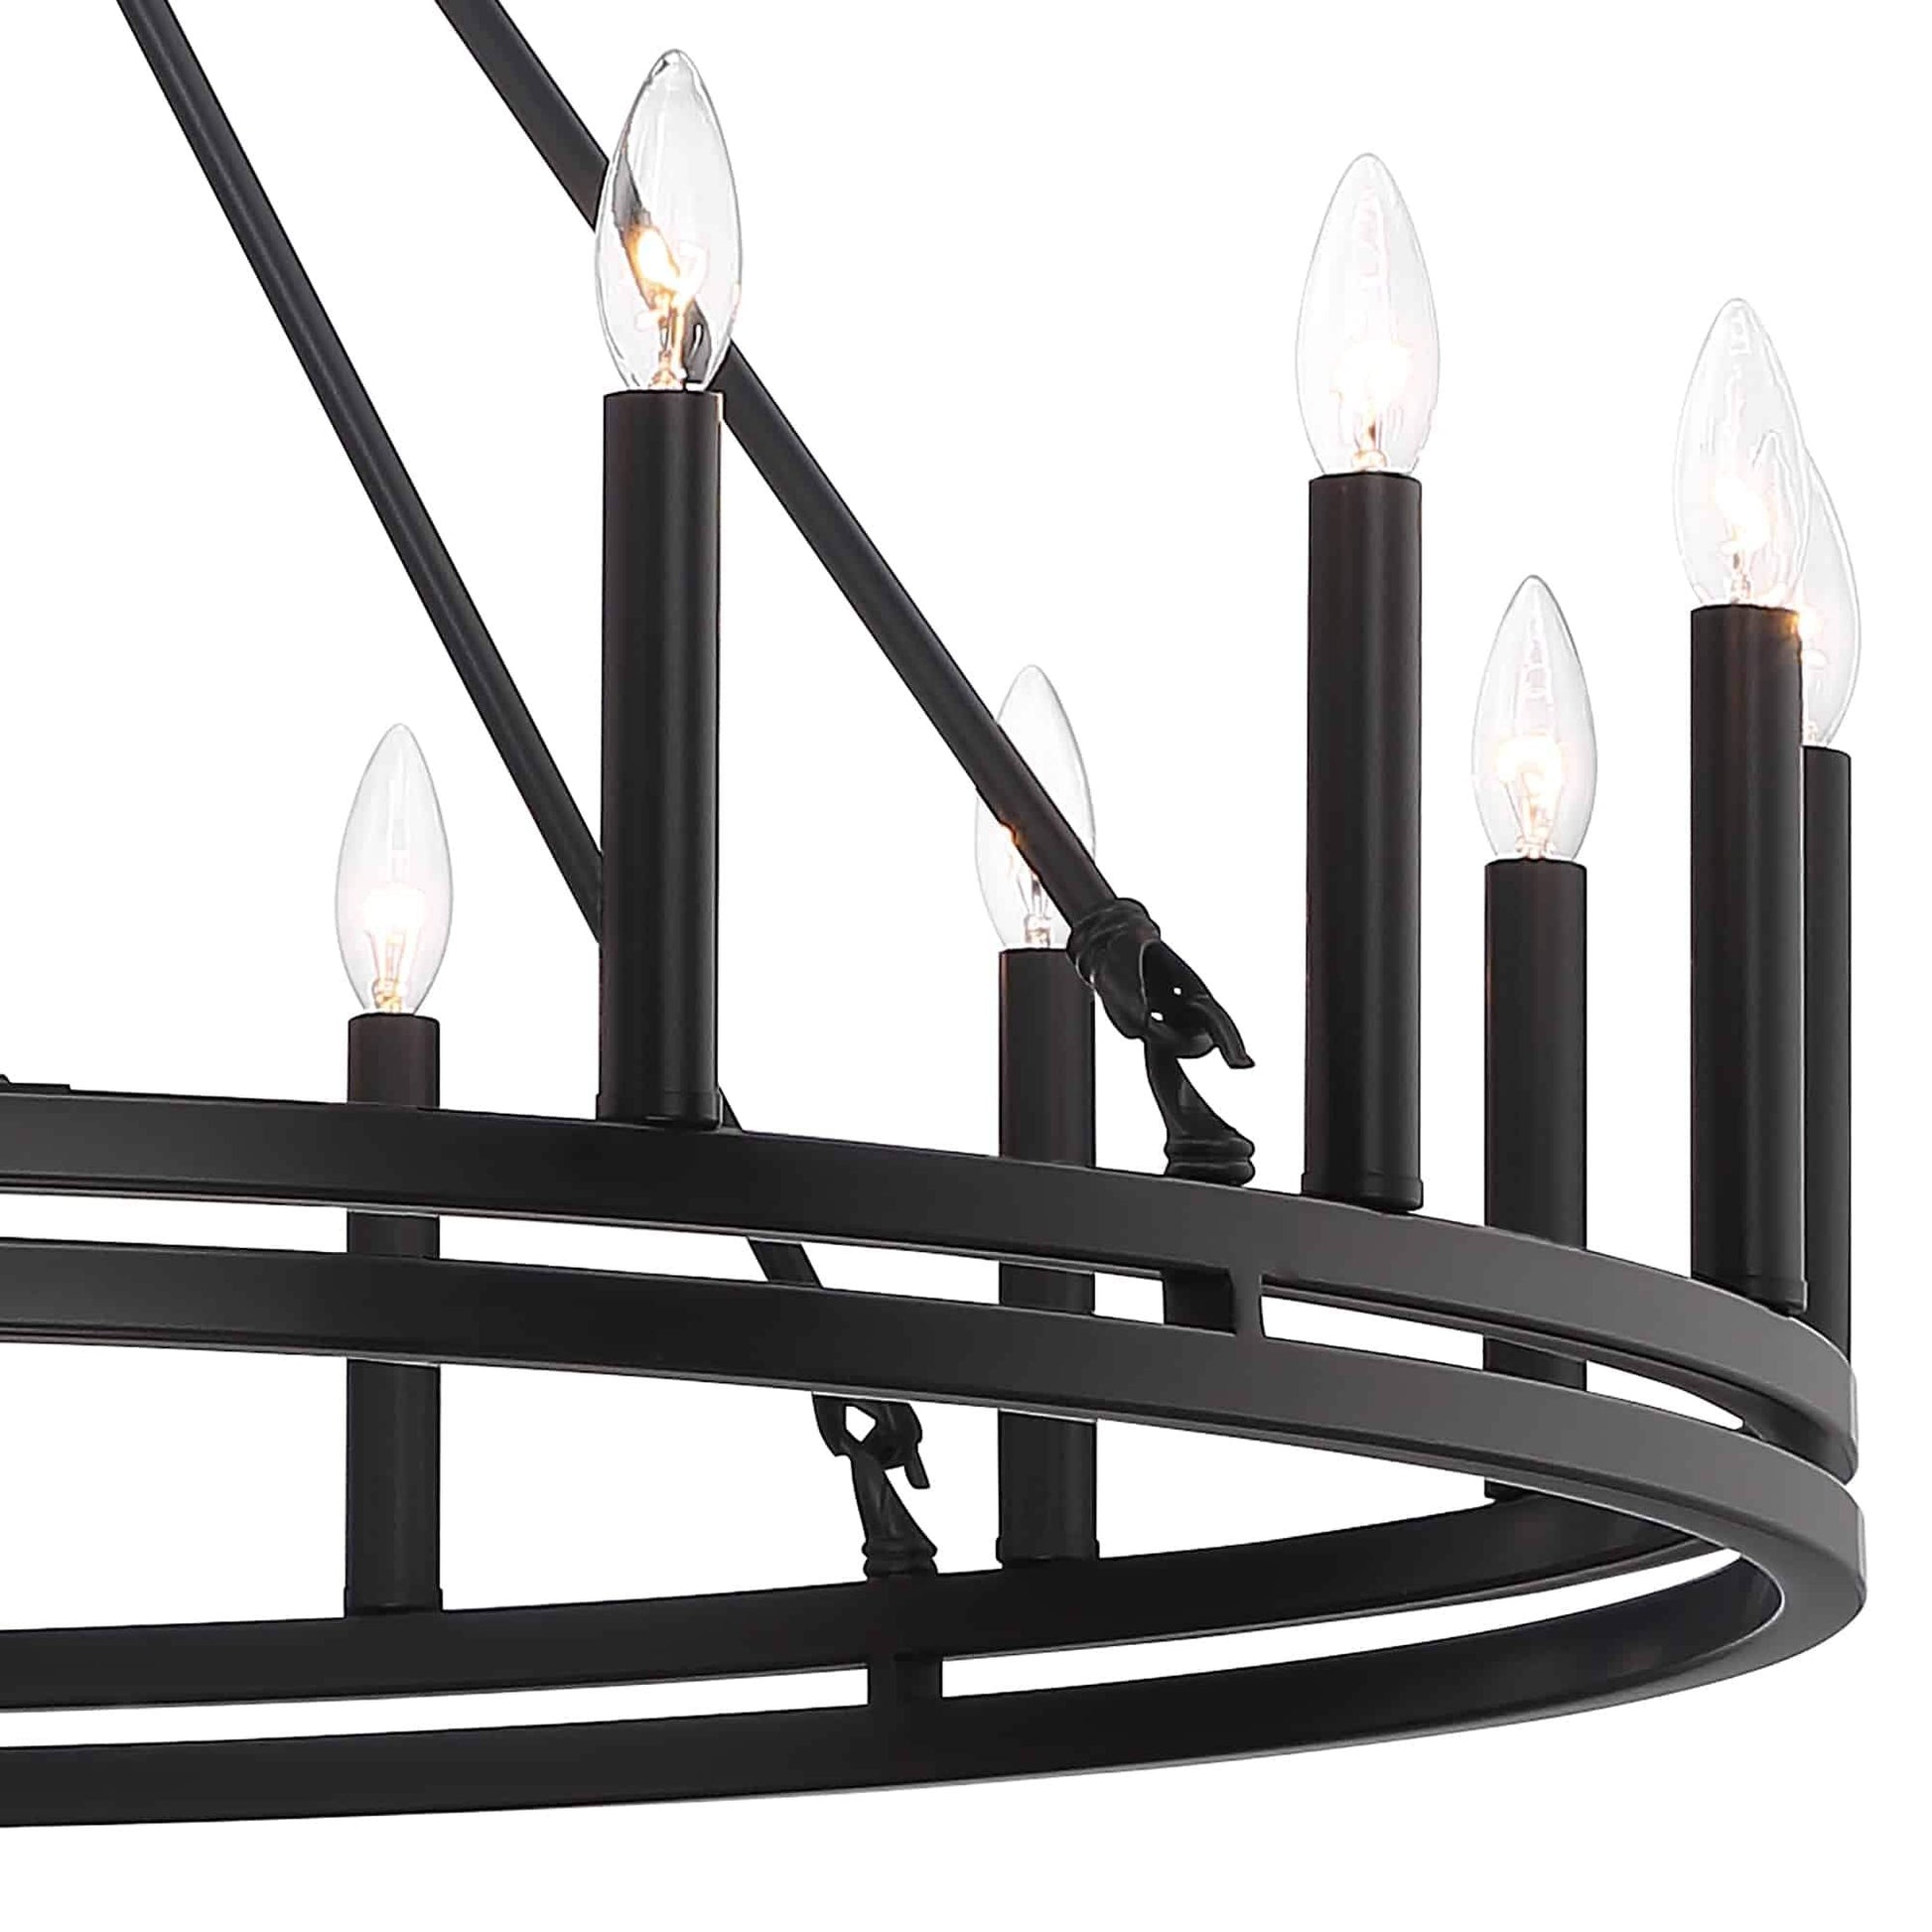 18 light candle style wagon wheel chandelier (17) by ACROMA